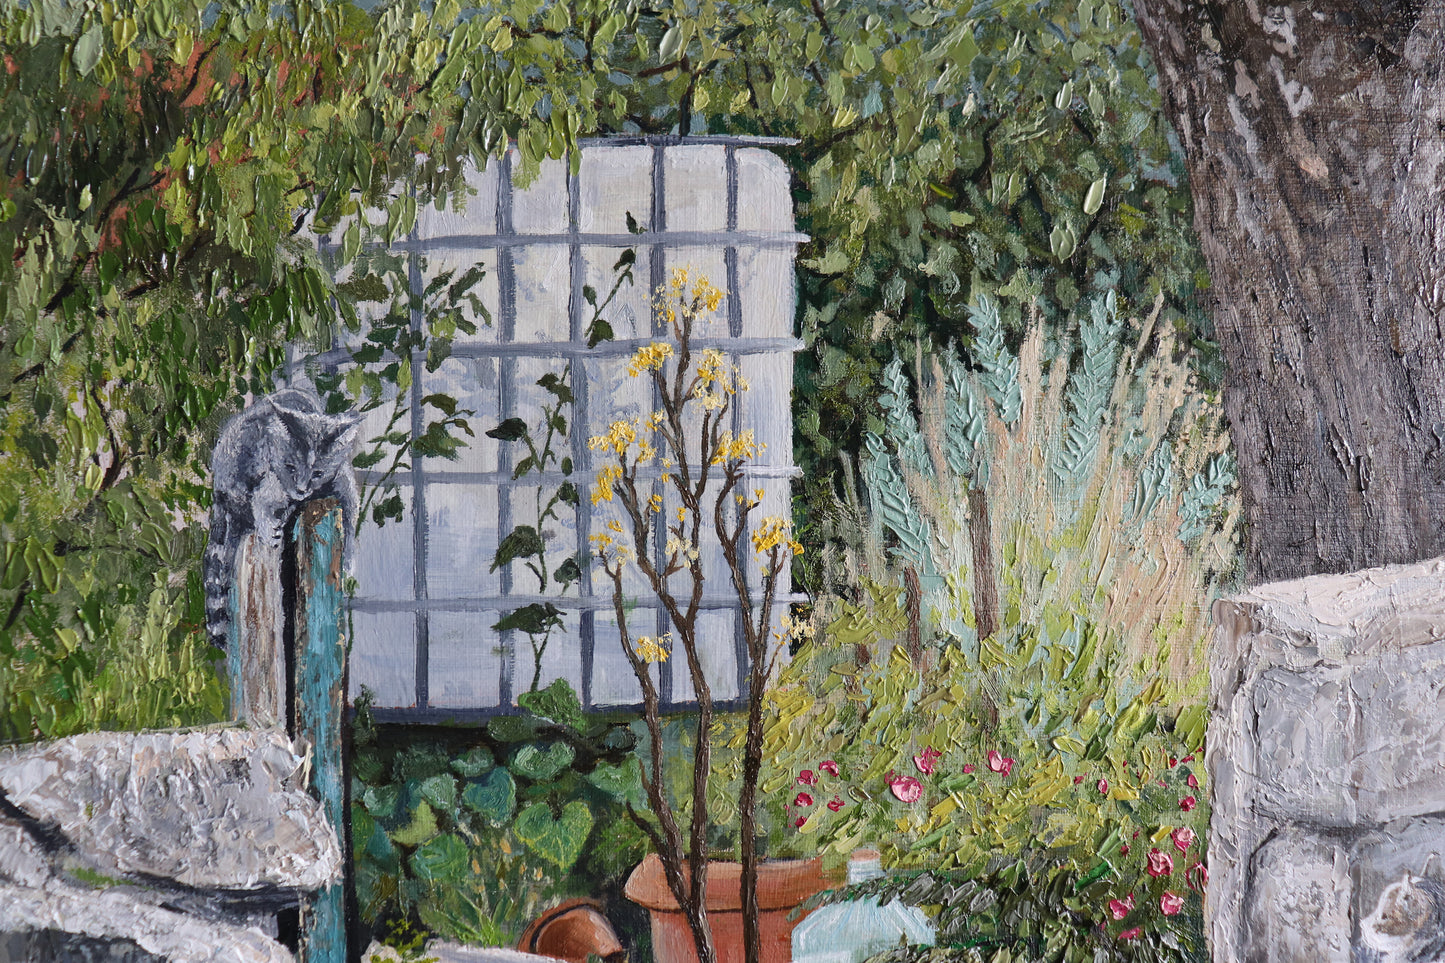 Nature's Voice by Jessie Bettersworth close up of overgrown garden detailed brushstrokes